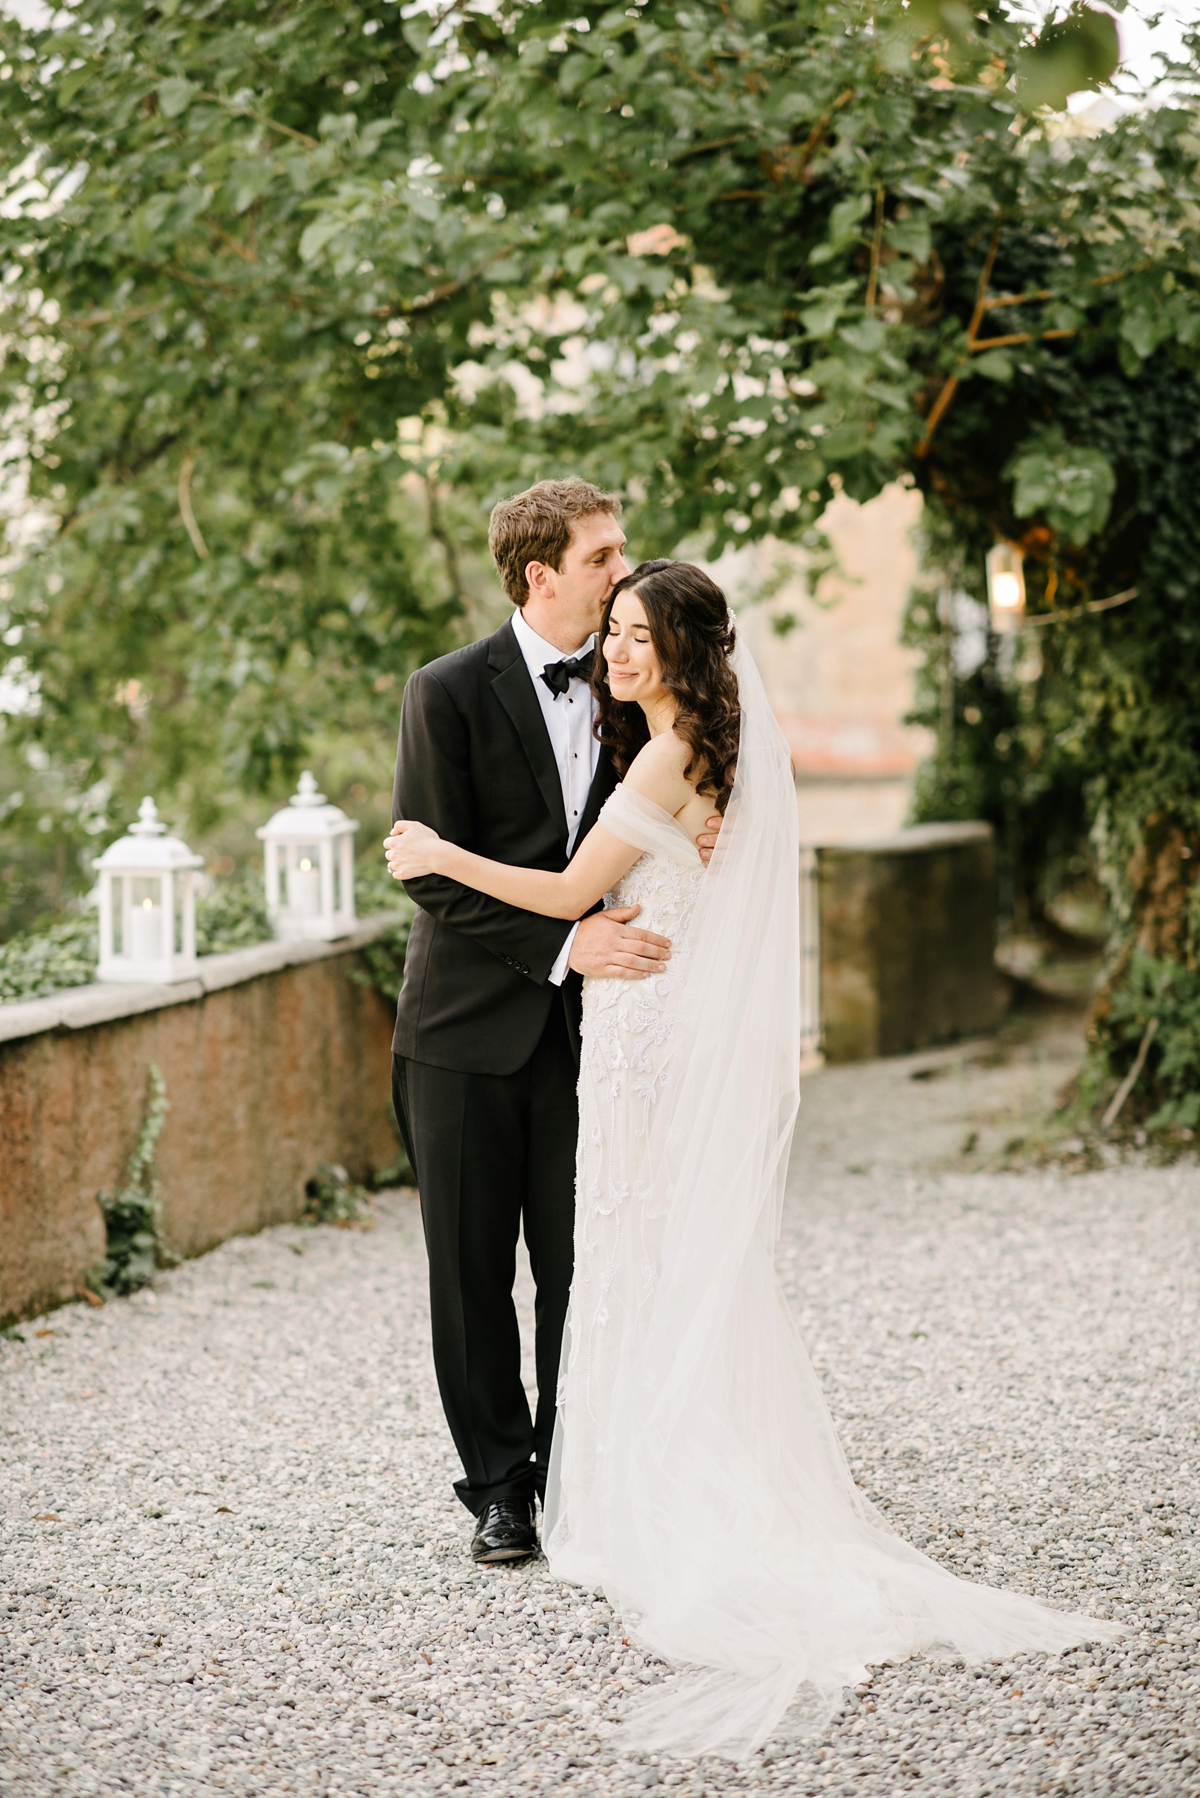 43 A Monique Lhuillier gown for a romantic summer villa wedding on Lake Como in Italy